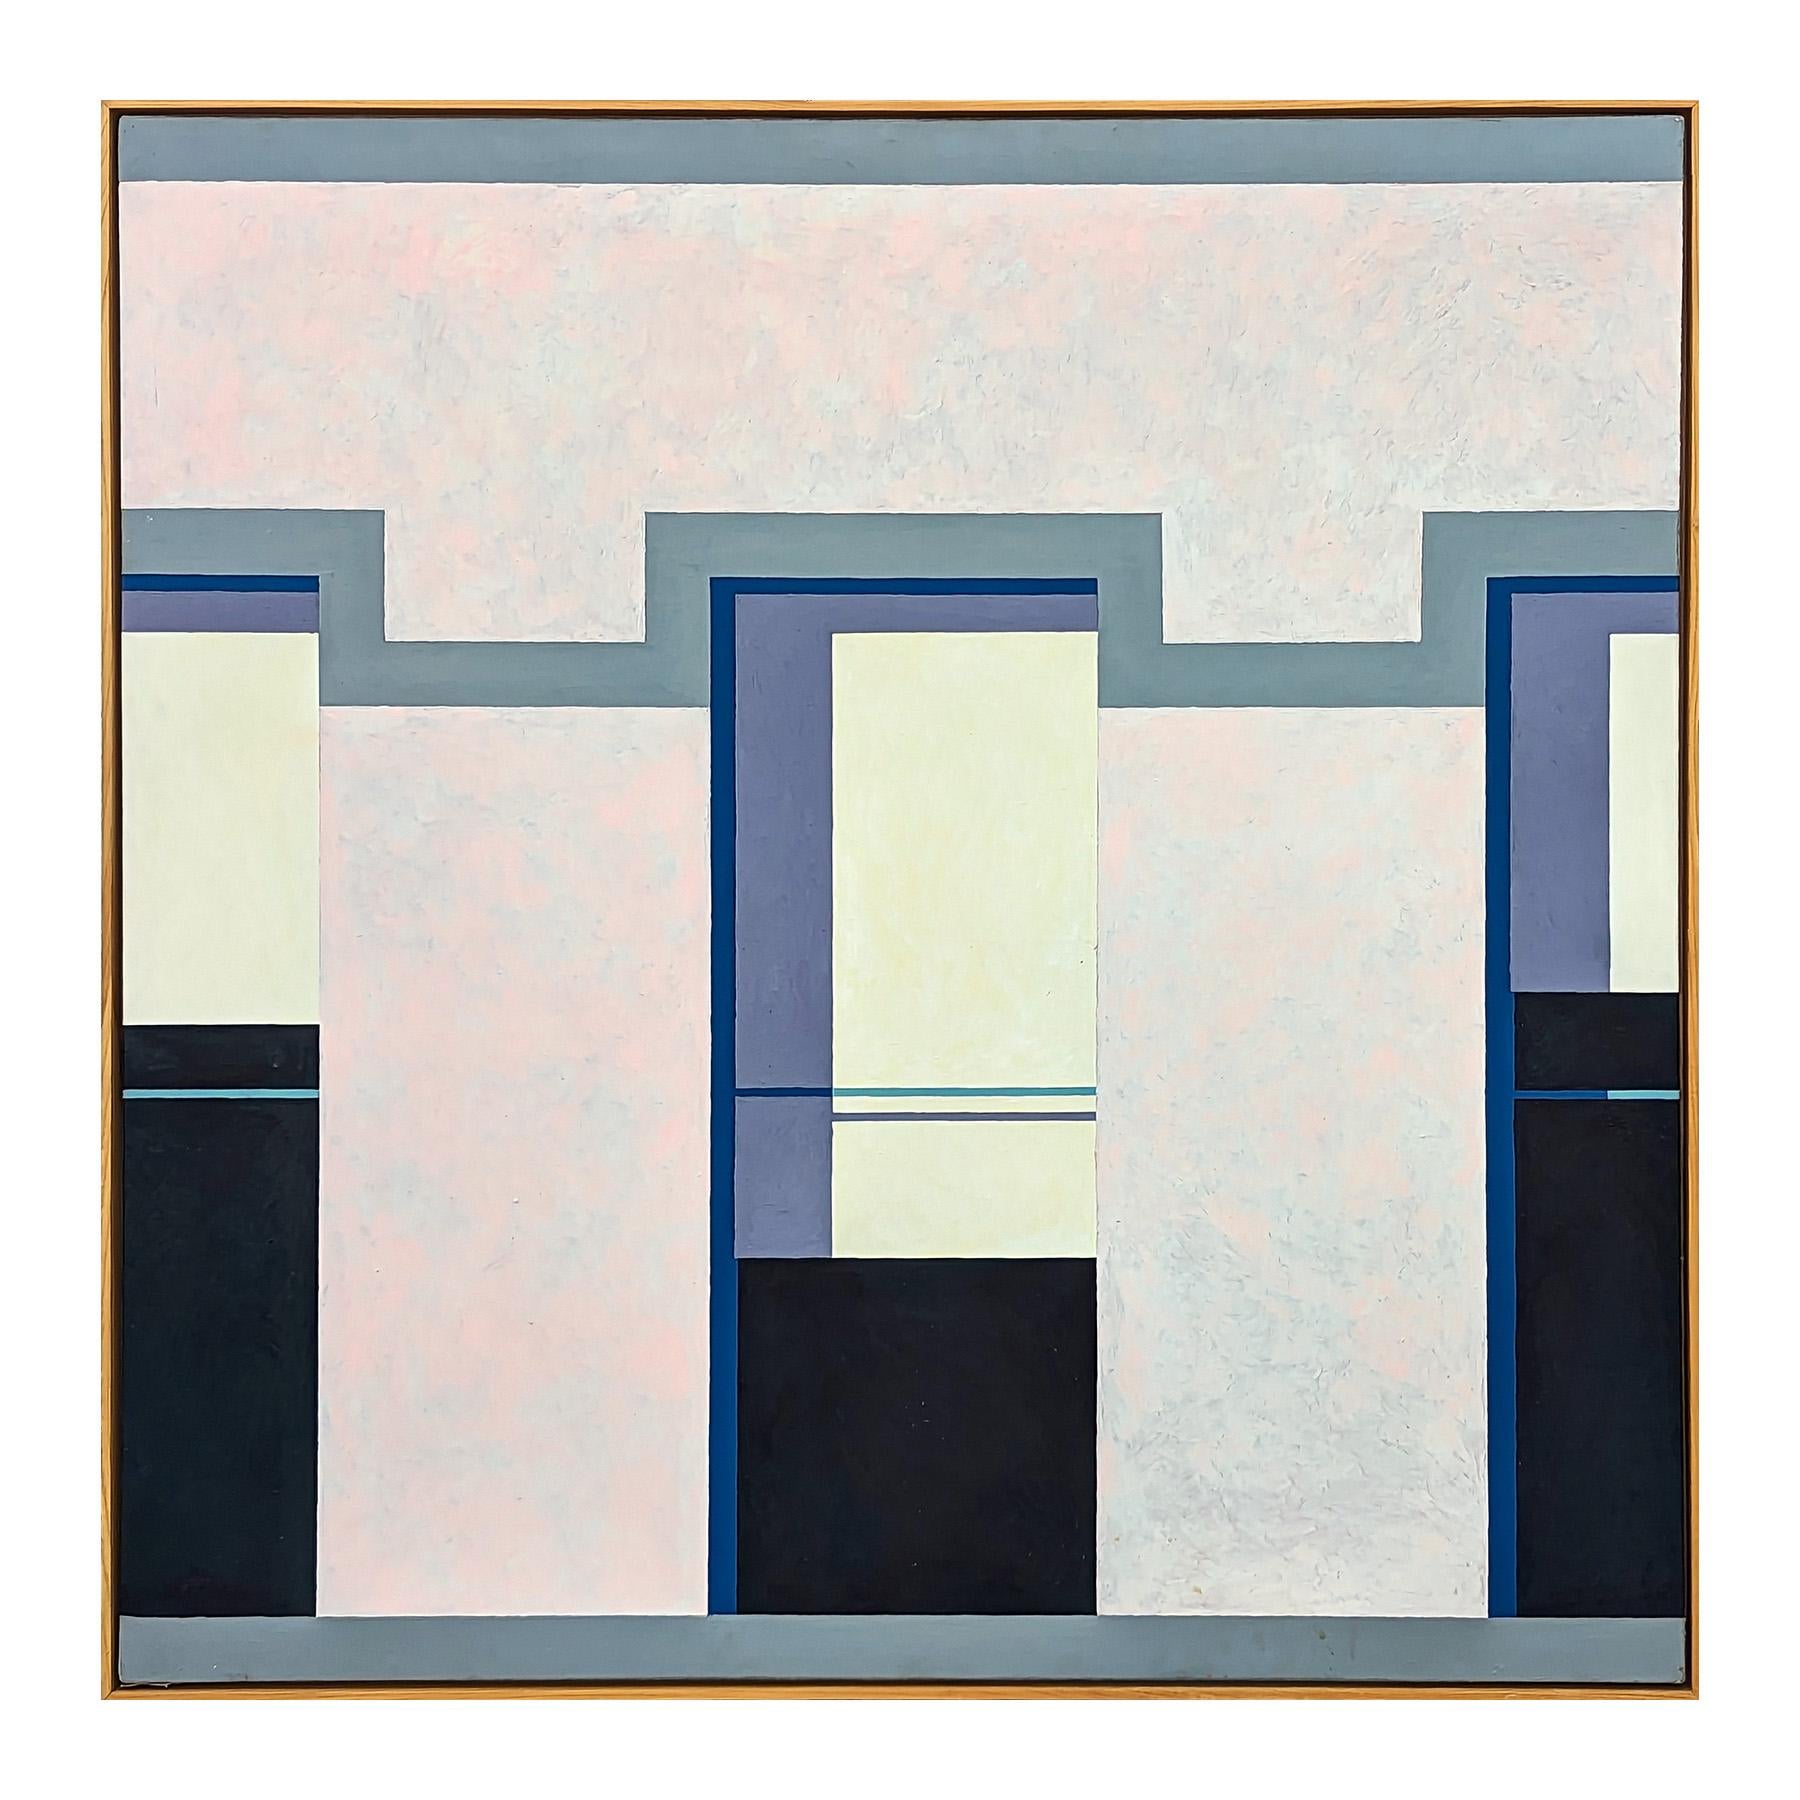 Modern pastel pink and yellow toned landscape painting by Texas born artist Clark Fox. The work features a clean-lined, geometric rendering of an architectural façade in shadow. Currently hung in a light wood floating frame. 

Dimensions Without